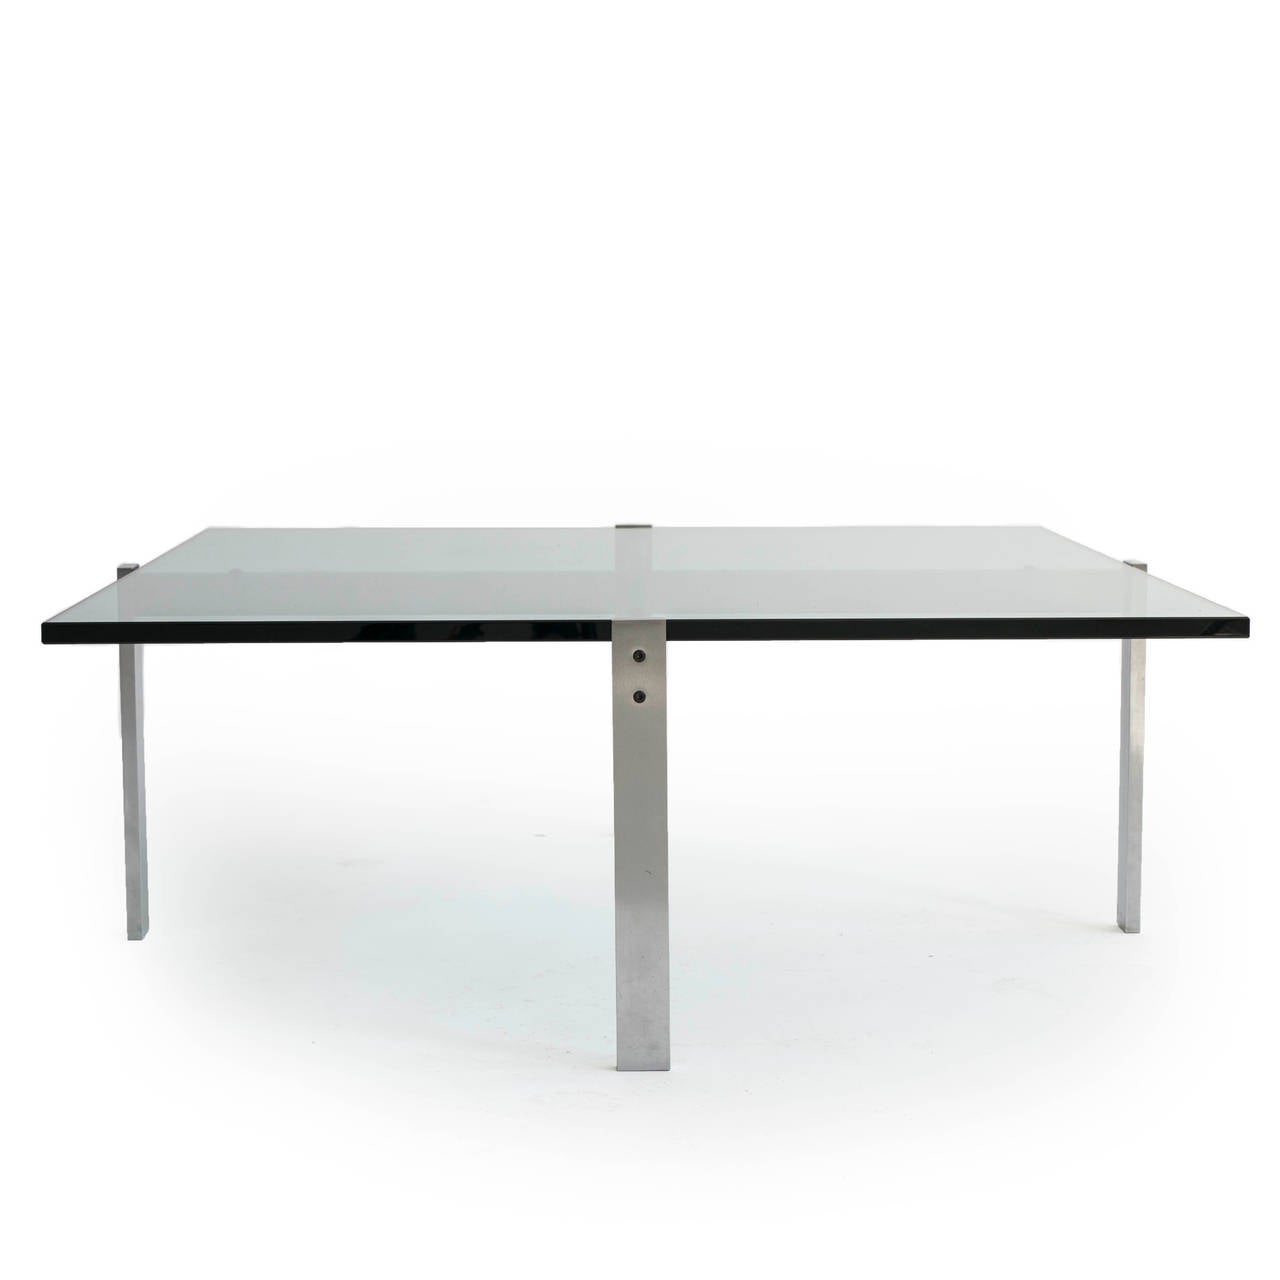 Poul Kjærholm PK65 coffee table with frame of chromed steel and top of clear glass. 

Designed by Poul Kjaerholm, 1979 and manufactured by E. Kold Christensen. Copy of original invoice included. 

Fine condition.